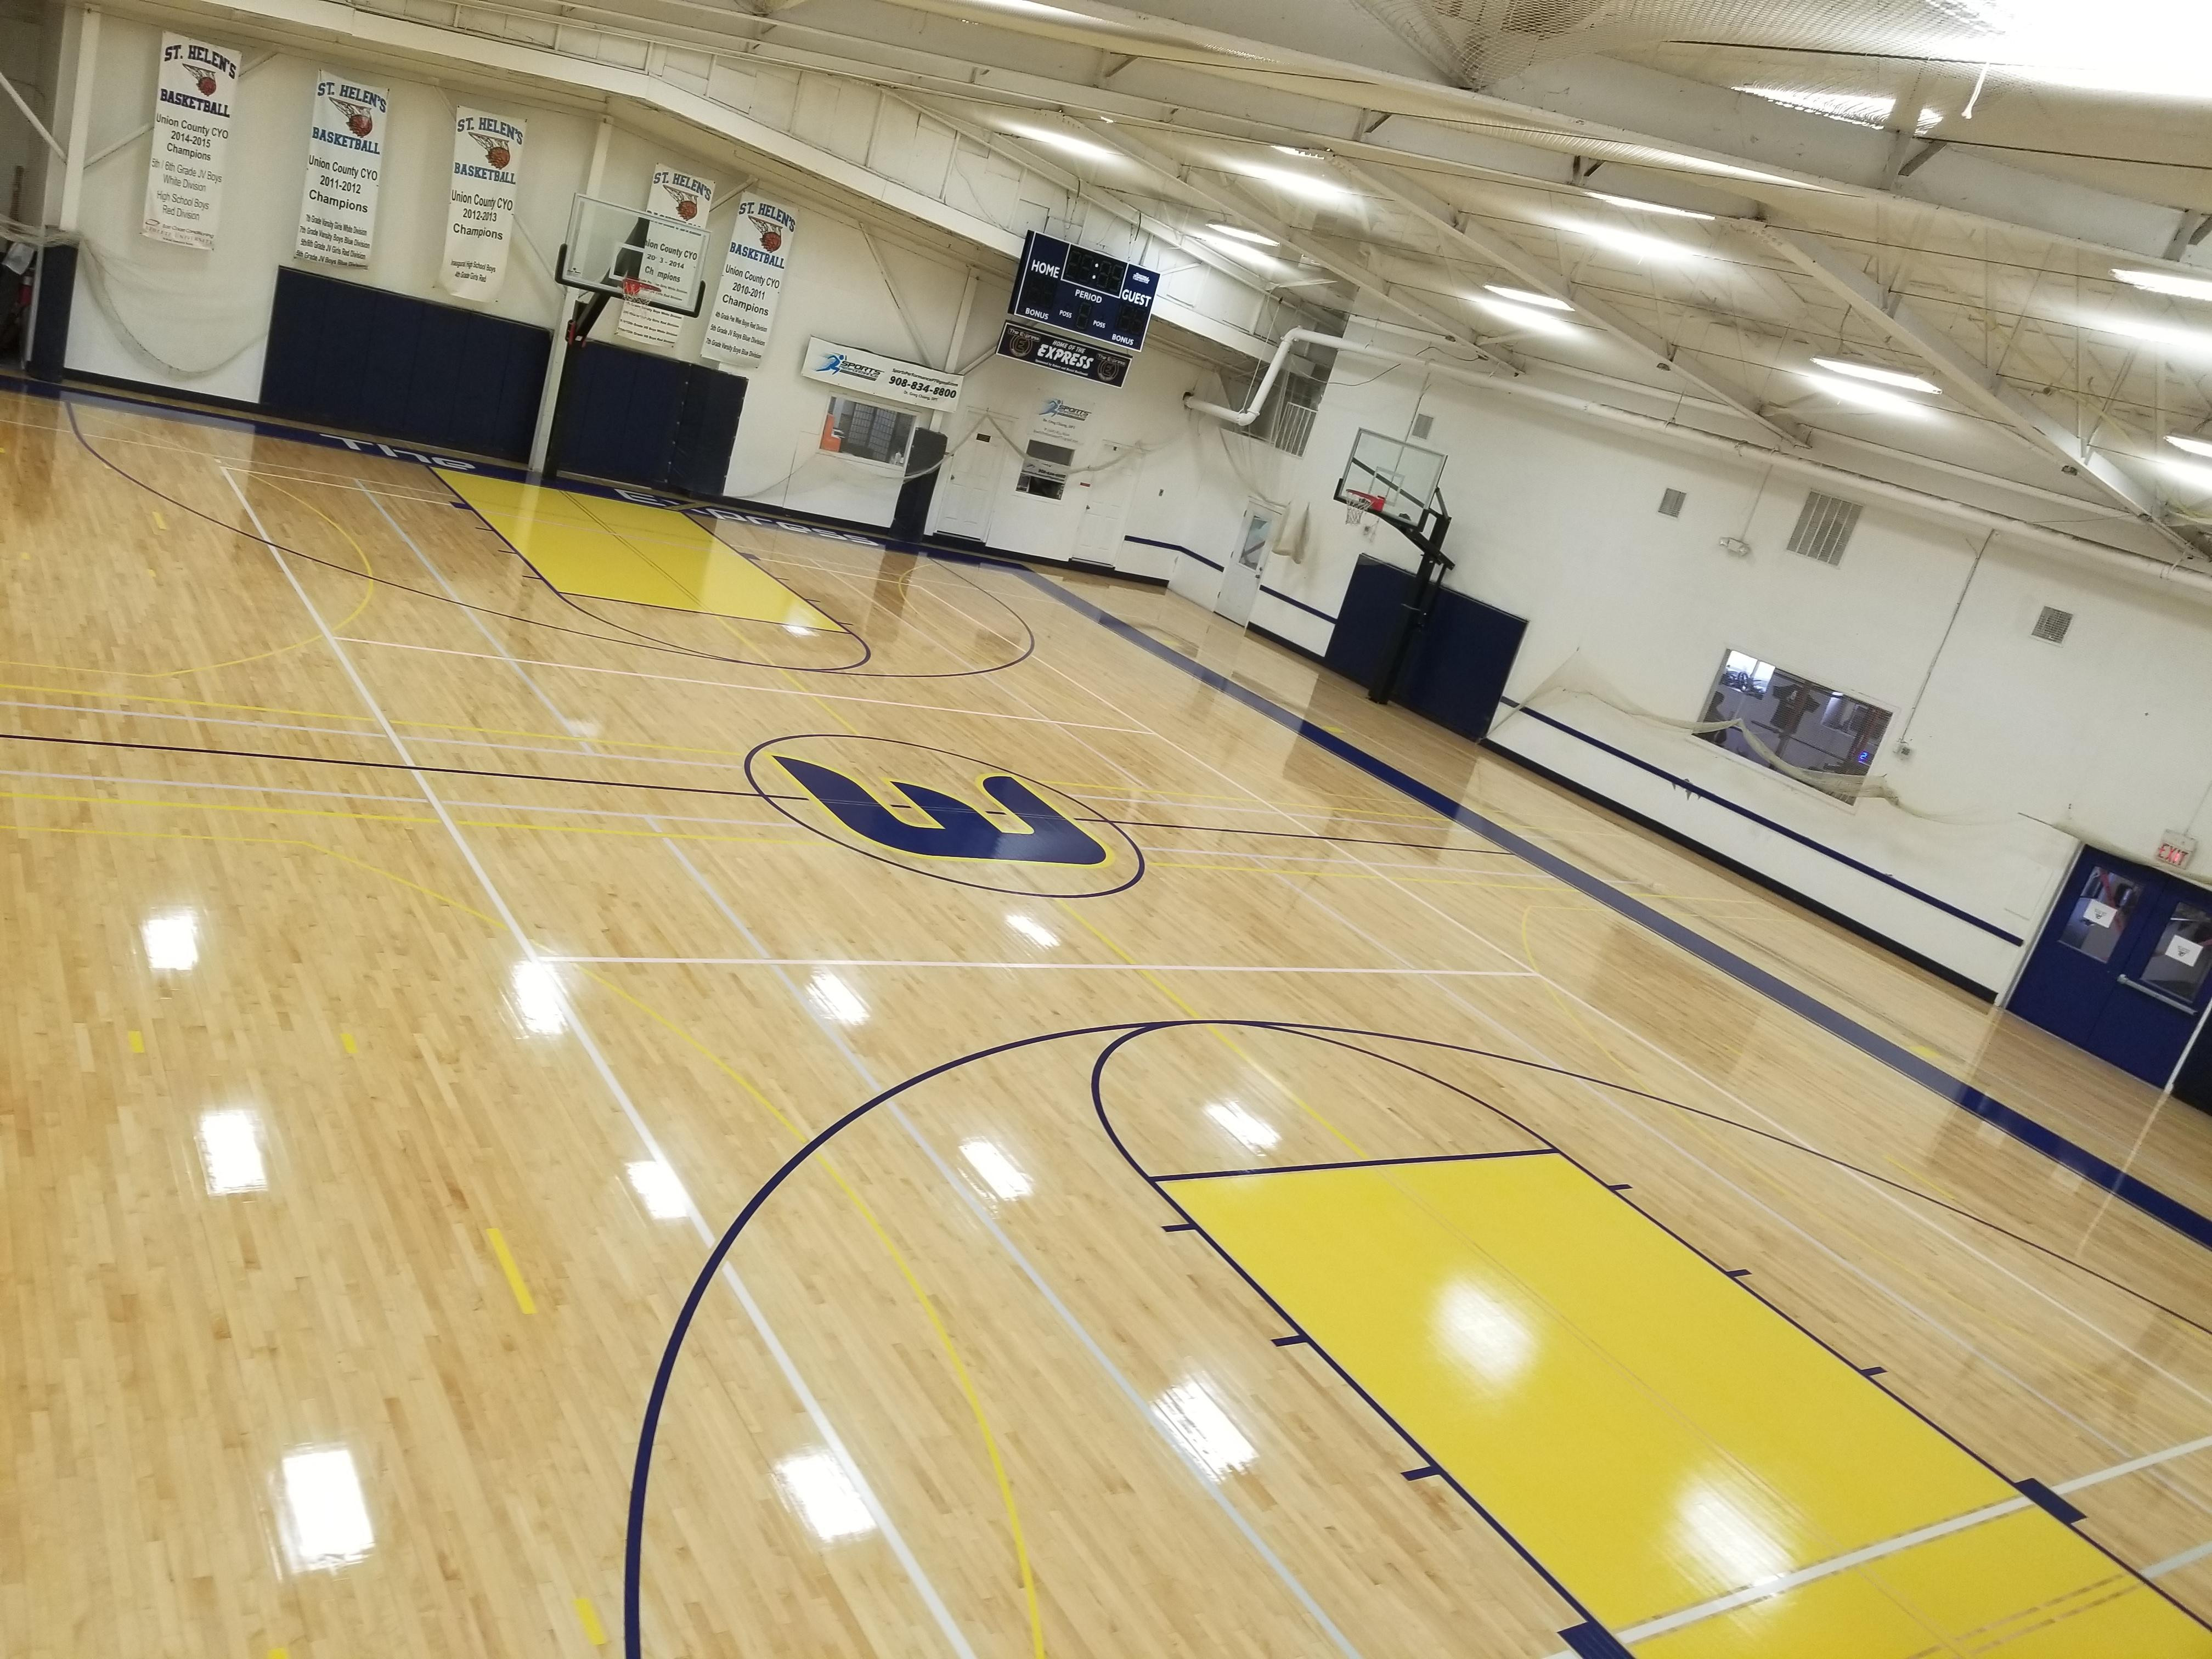 11 attractive Hardwood Floors Morristown Nj 2024 free download hardwood floors morristown nj of dennis kebrdle emt atlantic mobile health linkedin inside creating a fun environment for athletes of all ages come